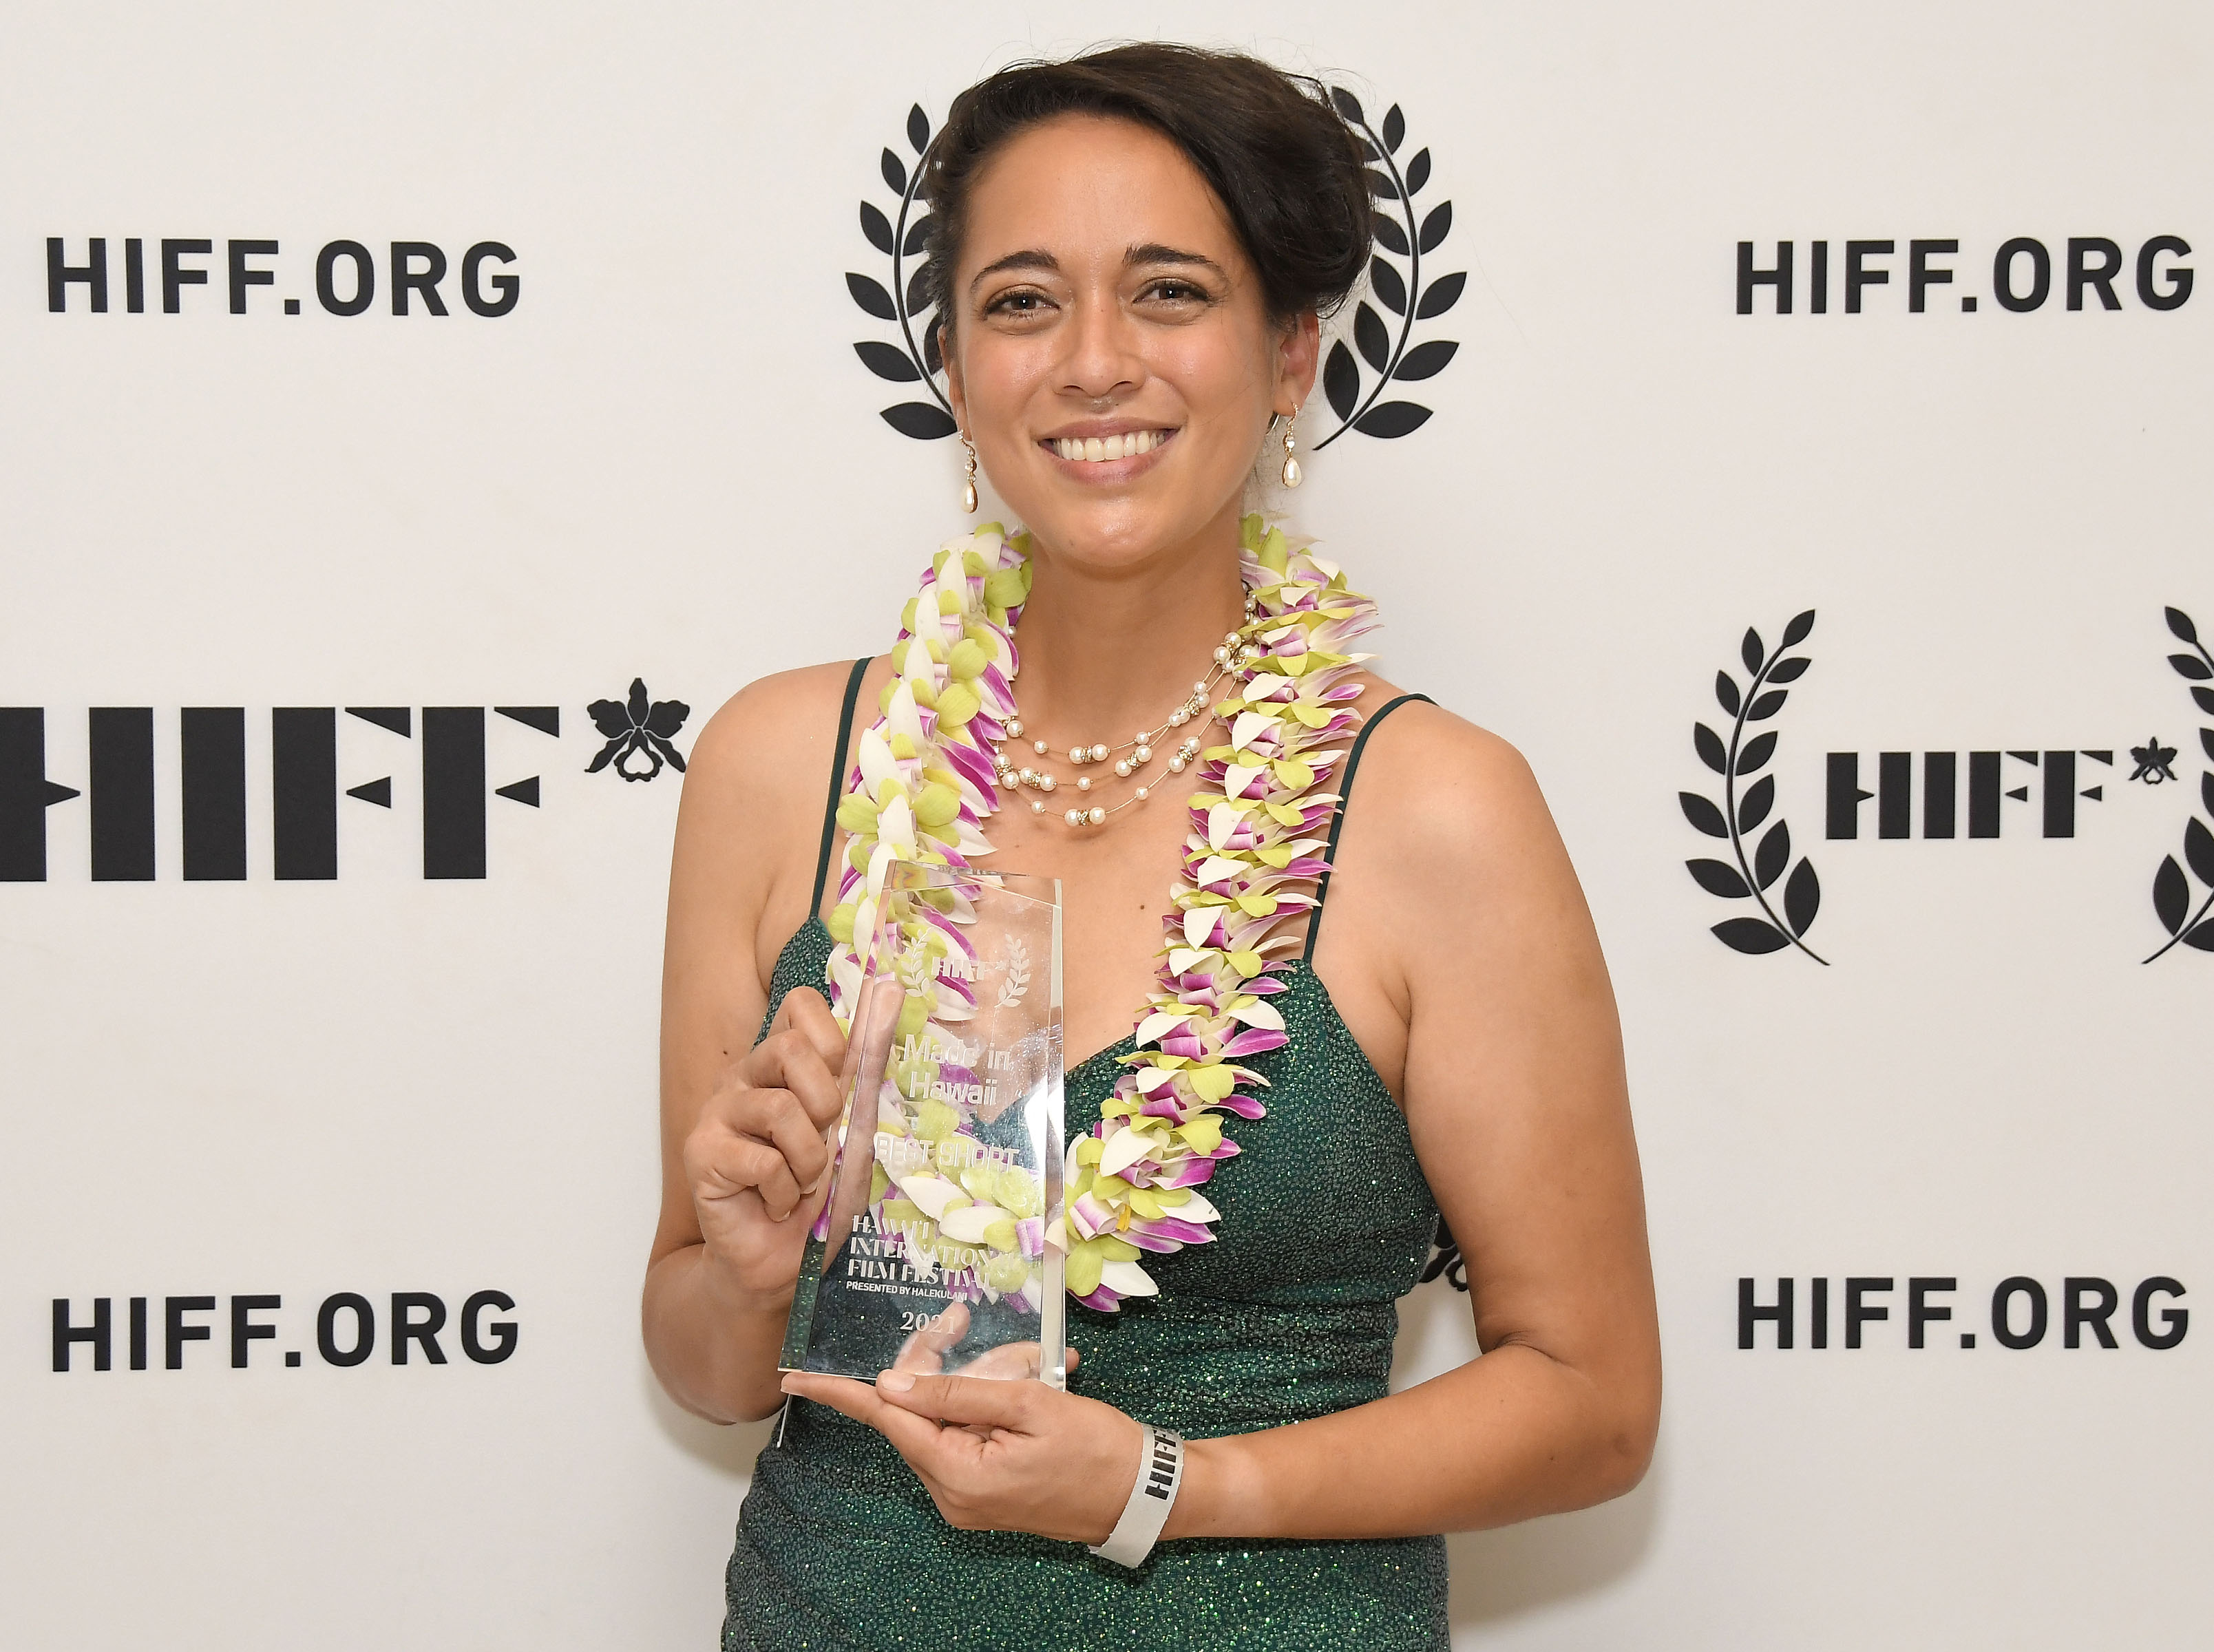 Actress Danielle Zalopany accepts the Best Made in Hawai’i Award Short  for RIVER OF SMALL GODS (Directed by Bradley Tangonan). Photo by Sthanlee B. Mirador/HIFF